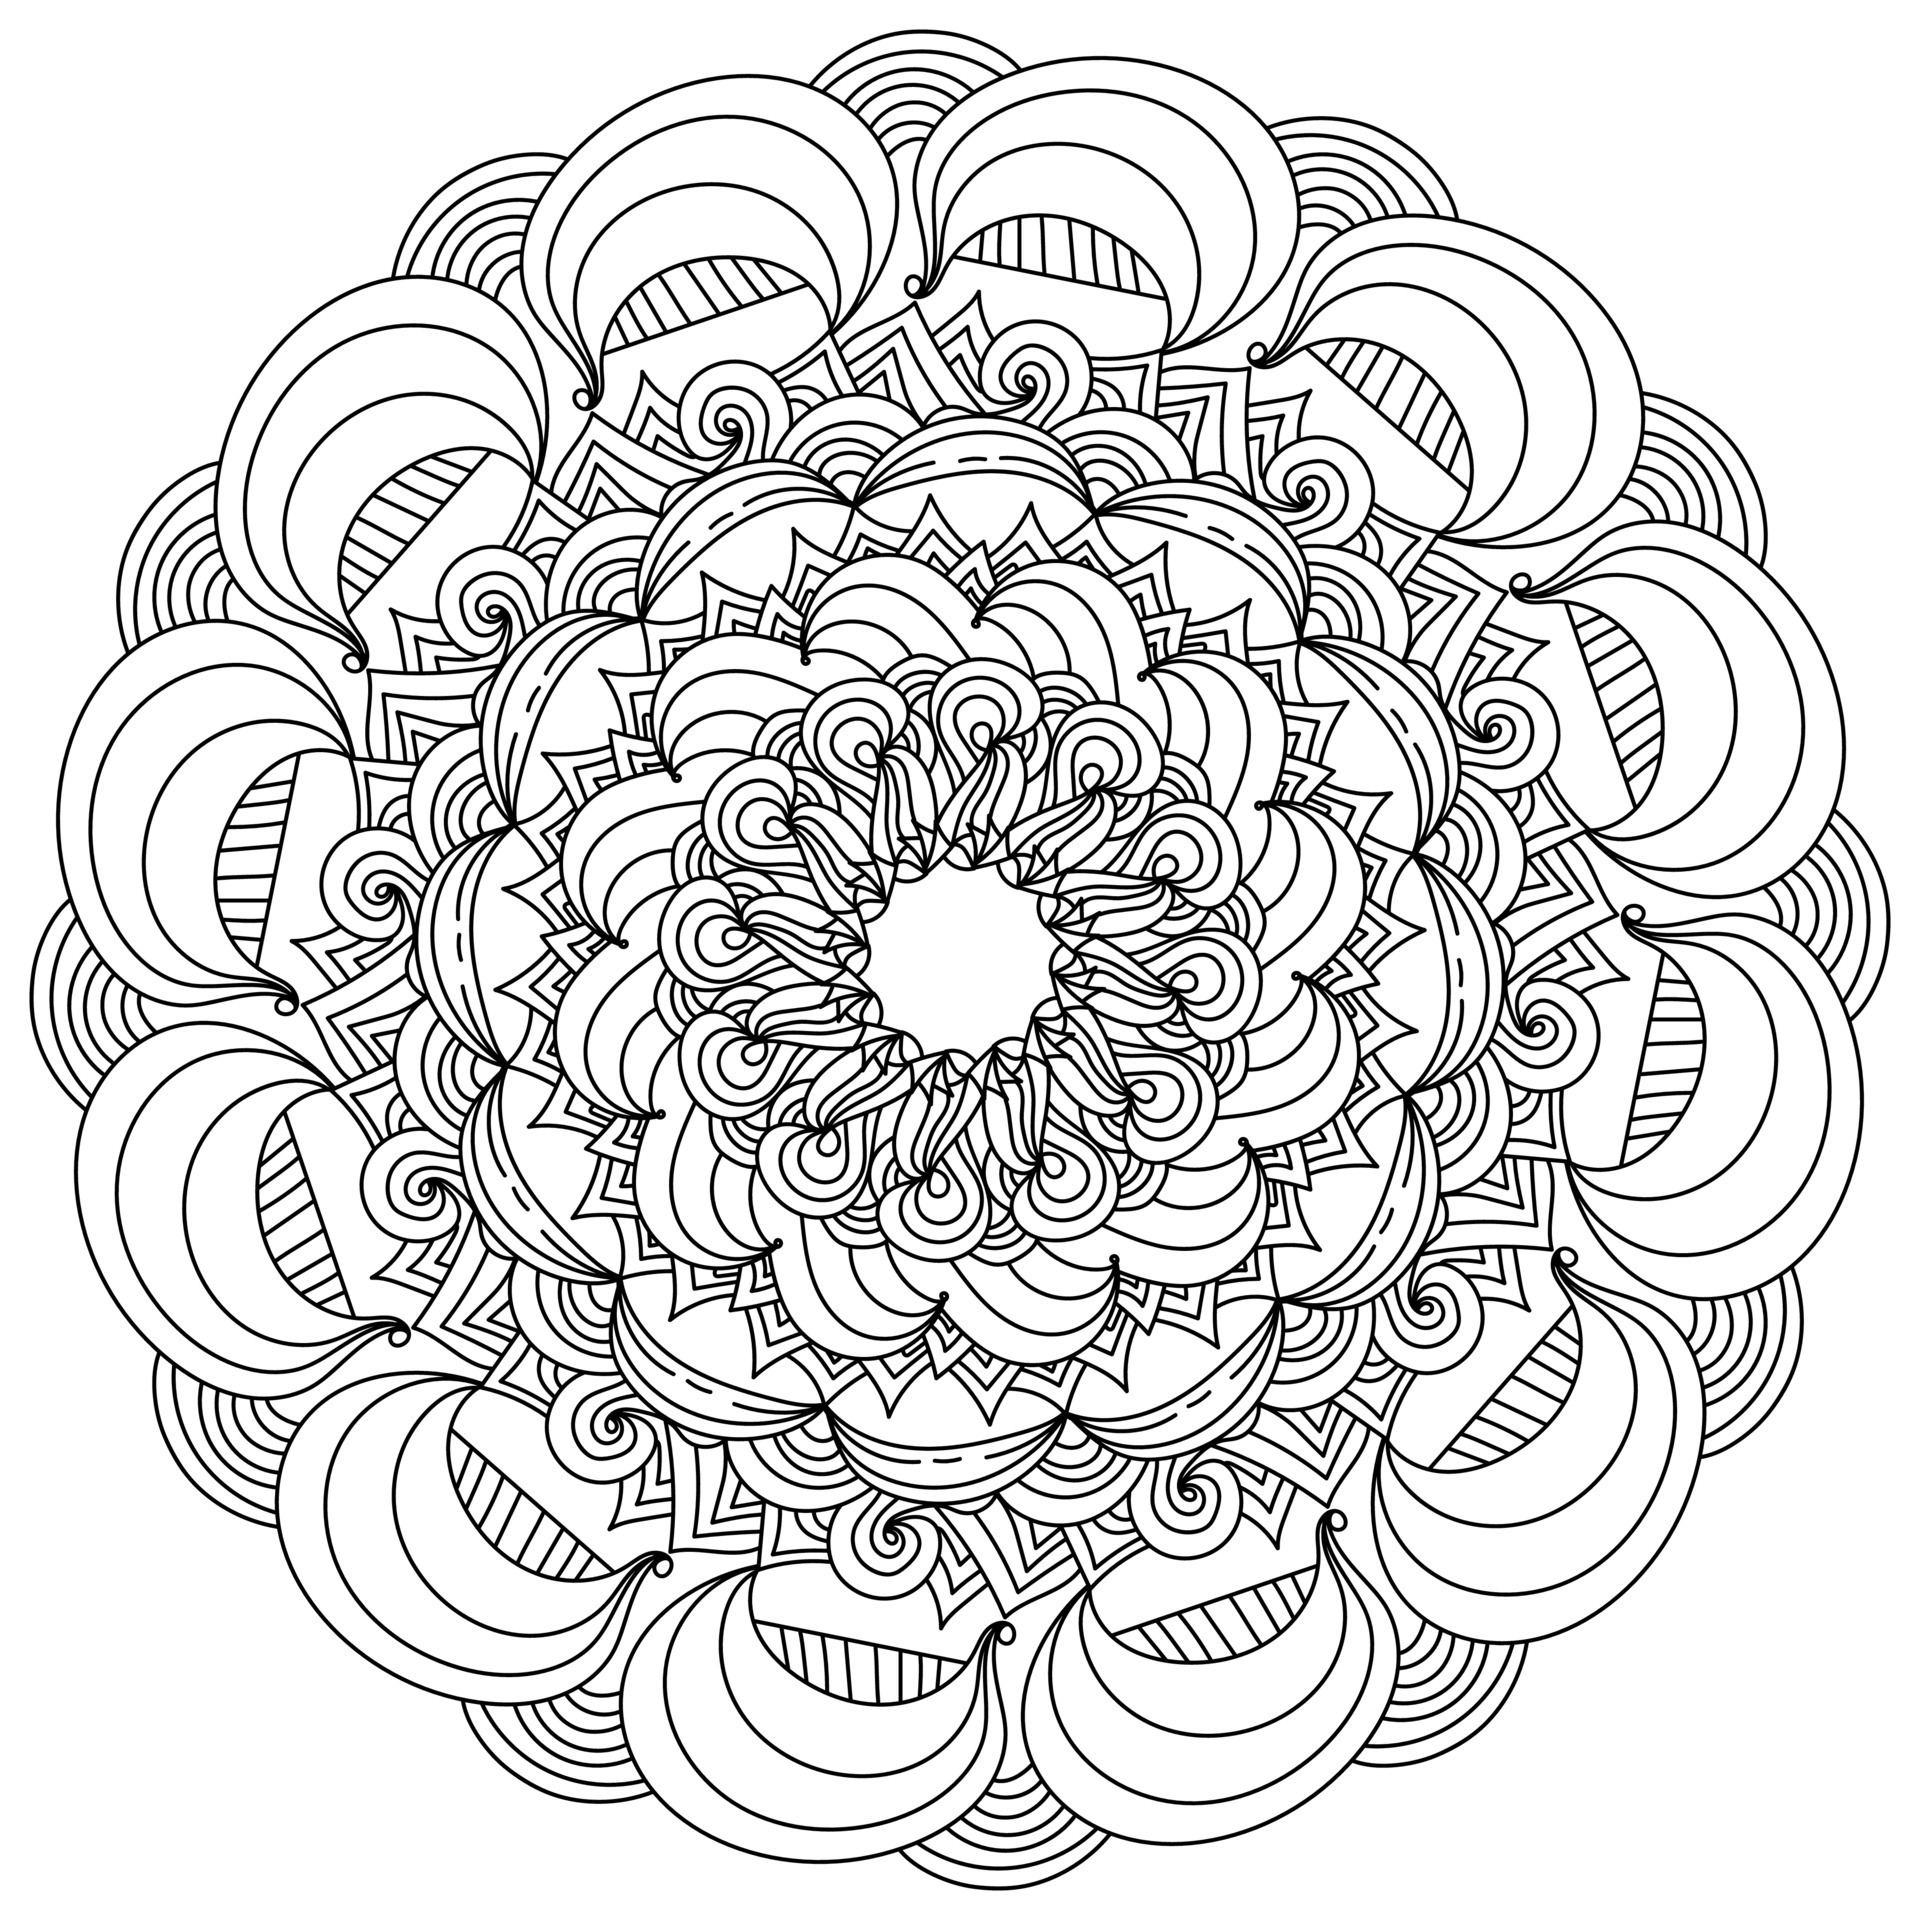 Antistress mandala coloring page with wide arches and curls, zen